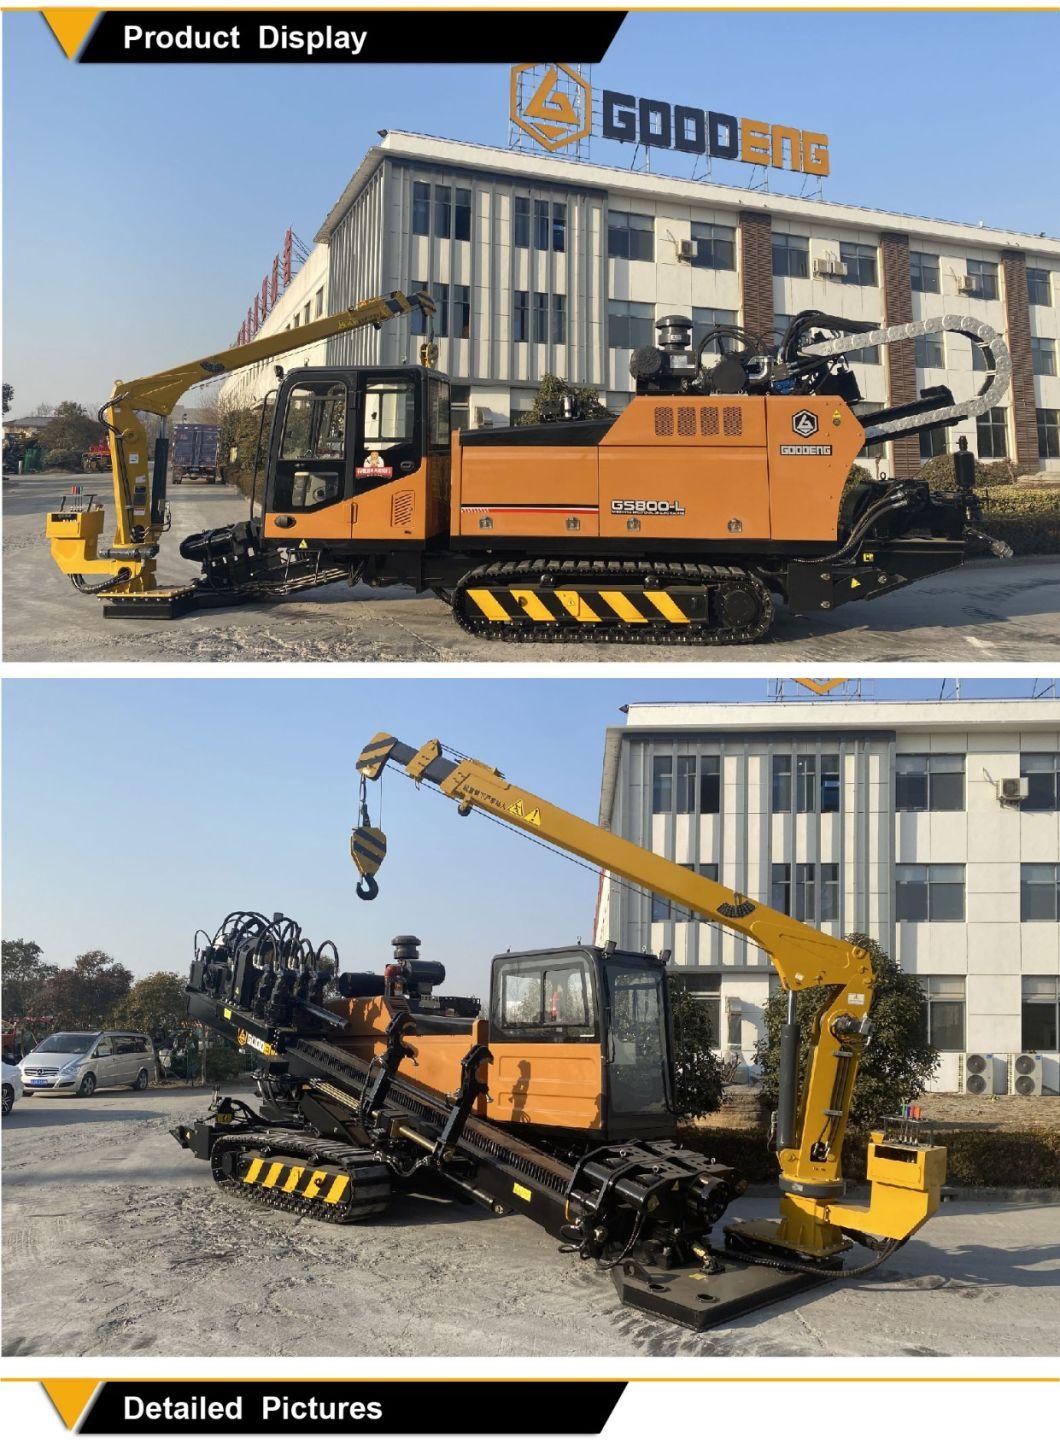 Goodeng GS800-LS HDD rig trenchless machine